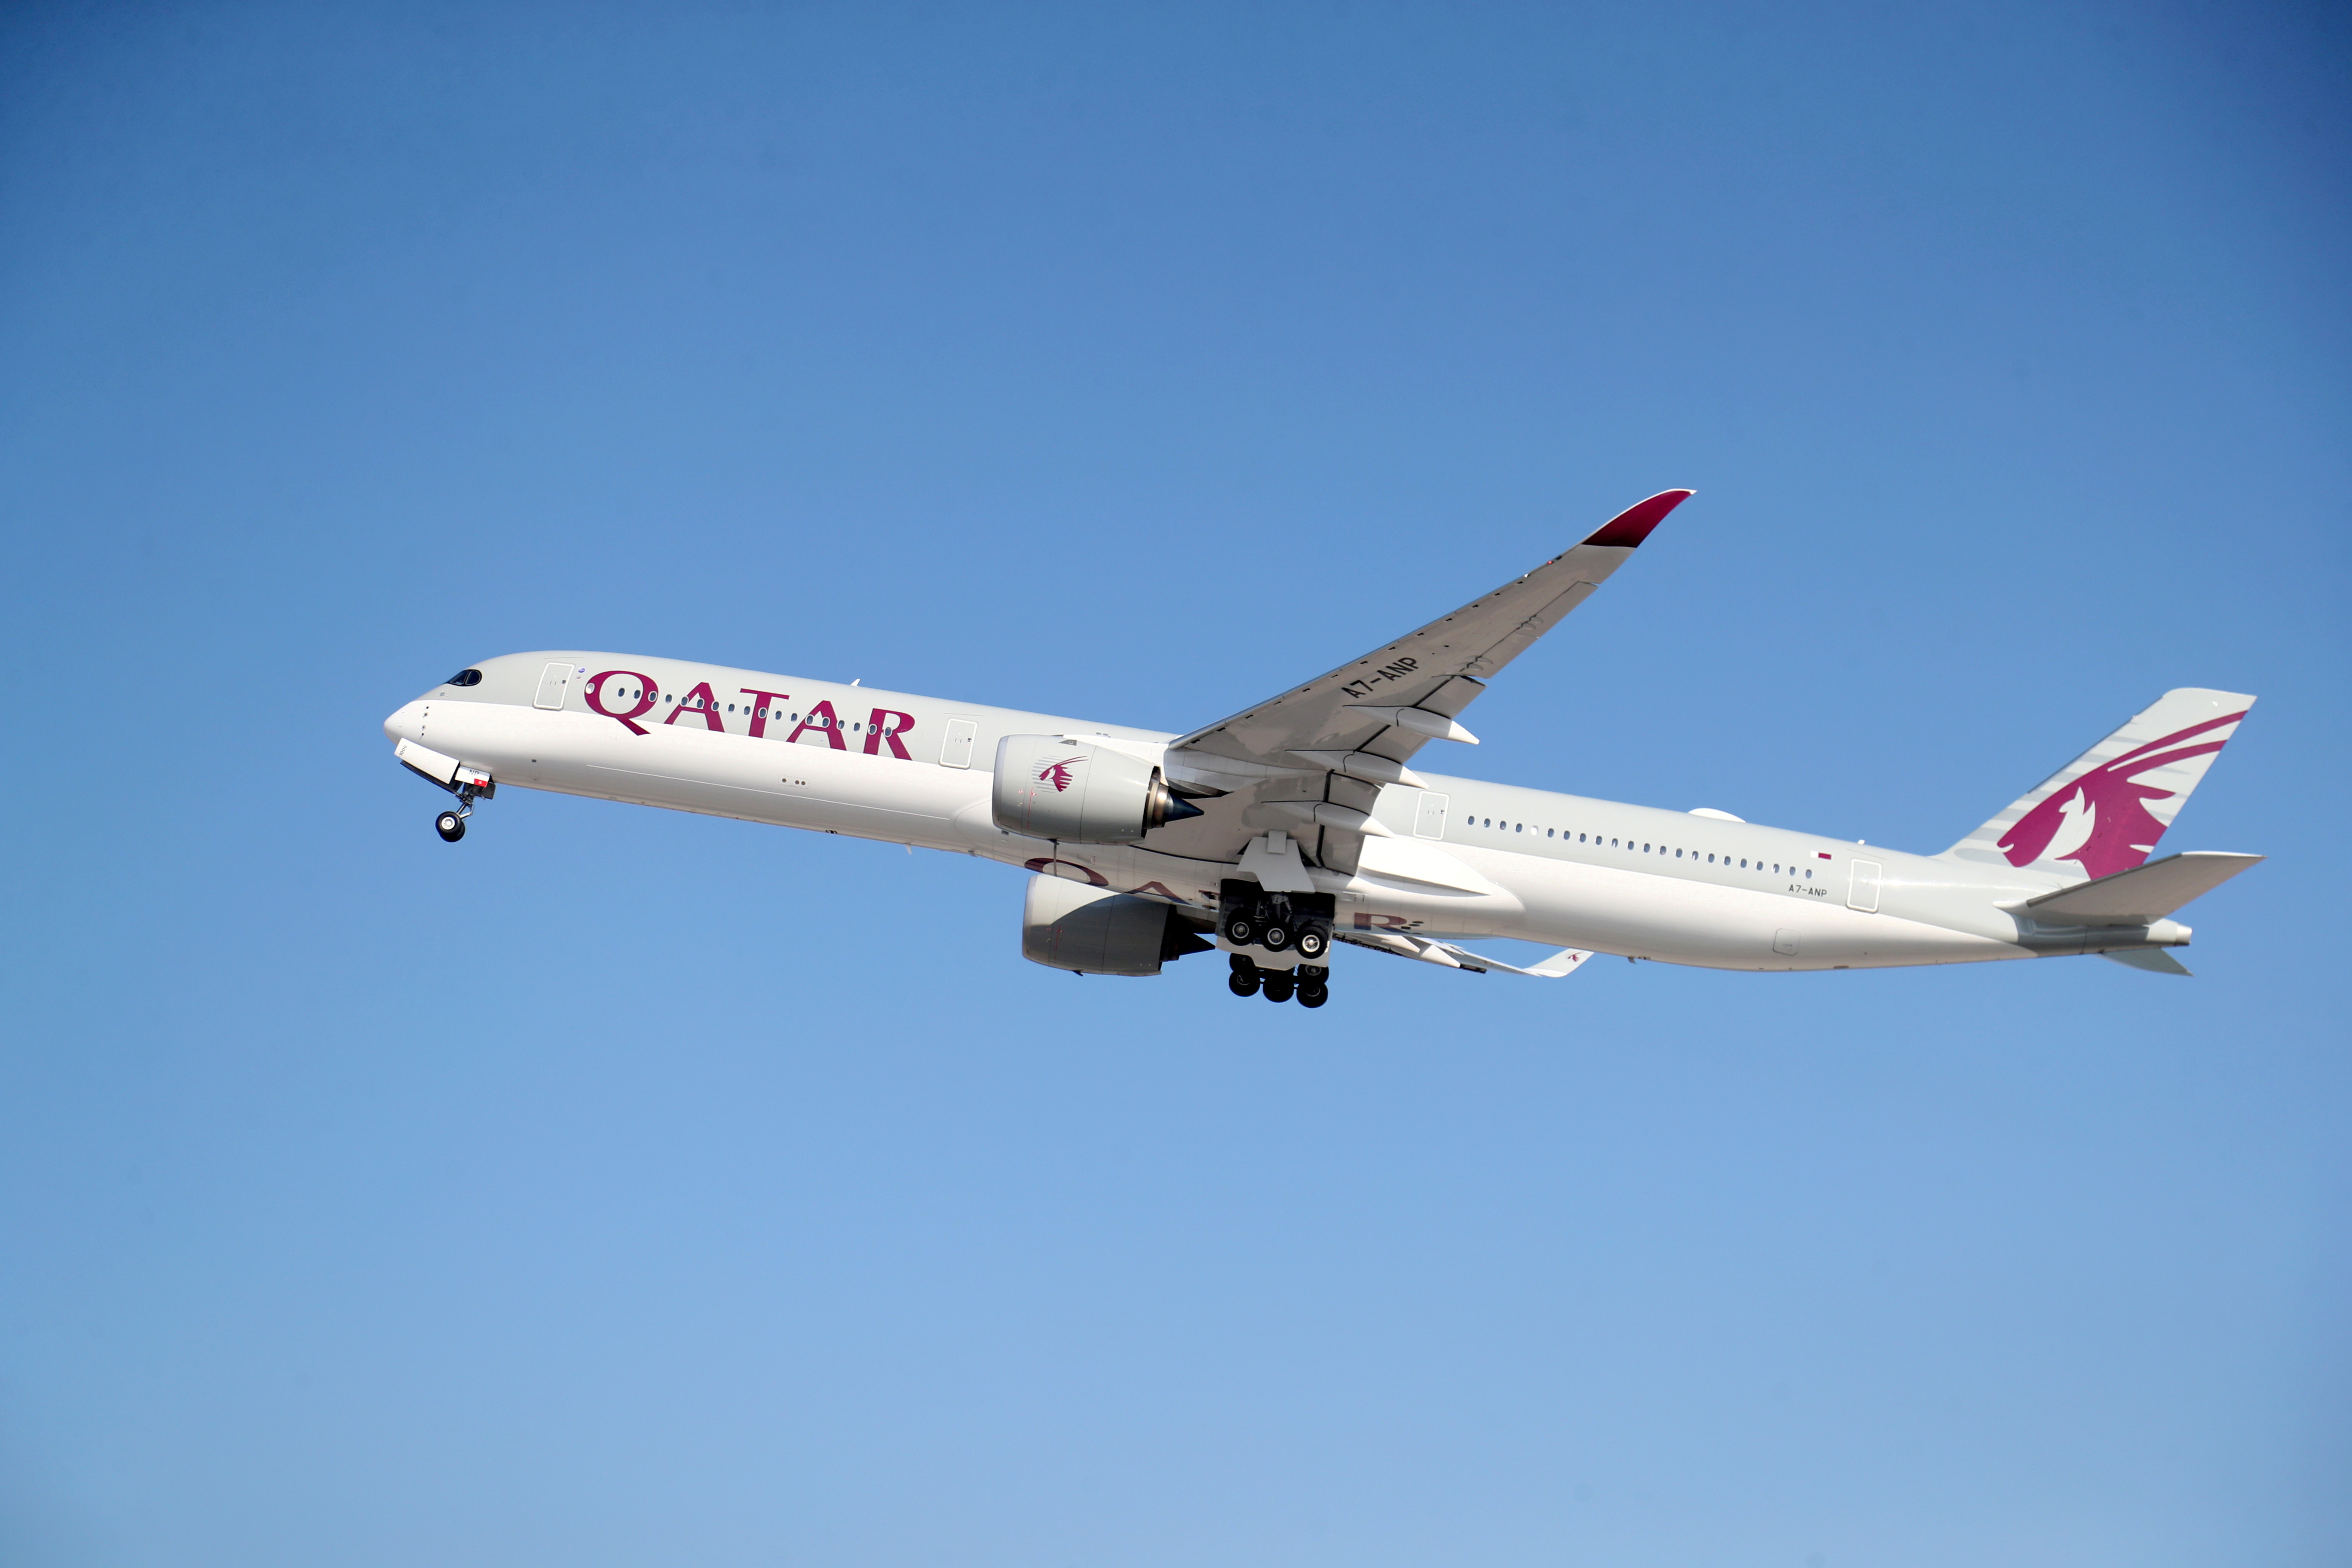 A Qatar Airways plane takes off at Hamad International Airport, as the country resumes international flights to Saudi Arabia, in Doha